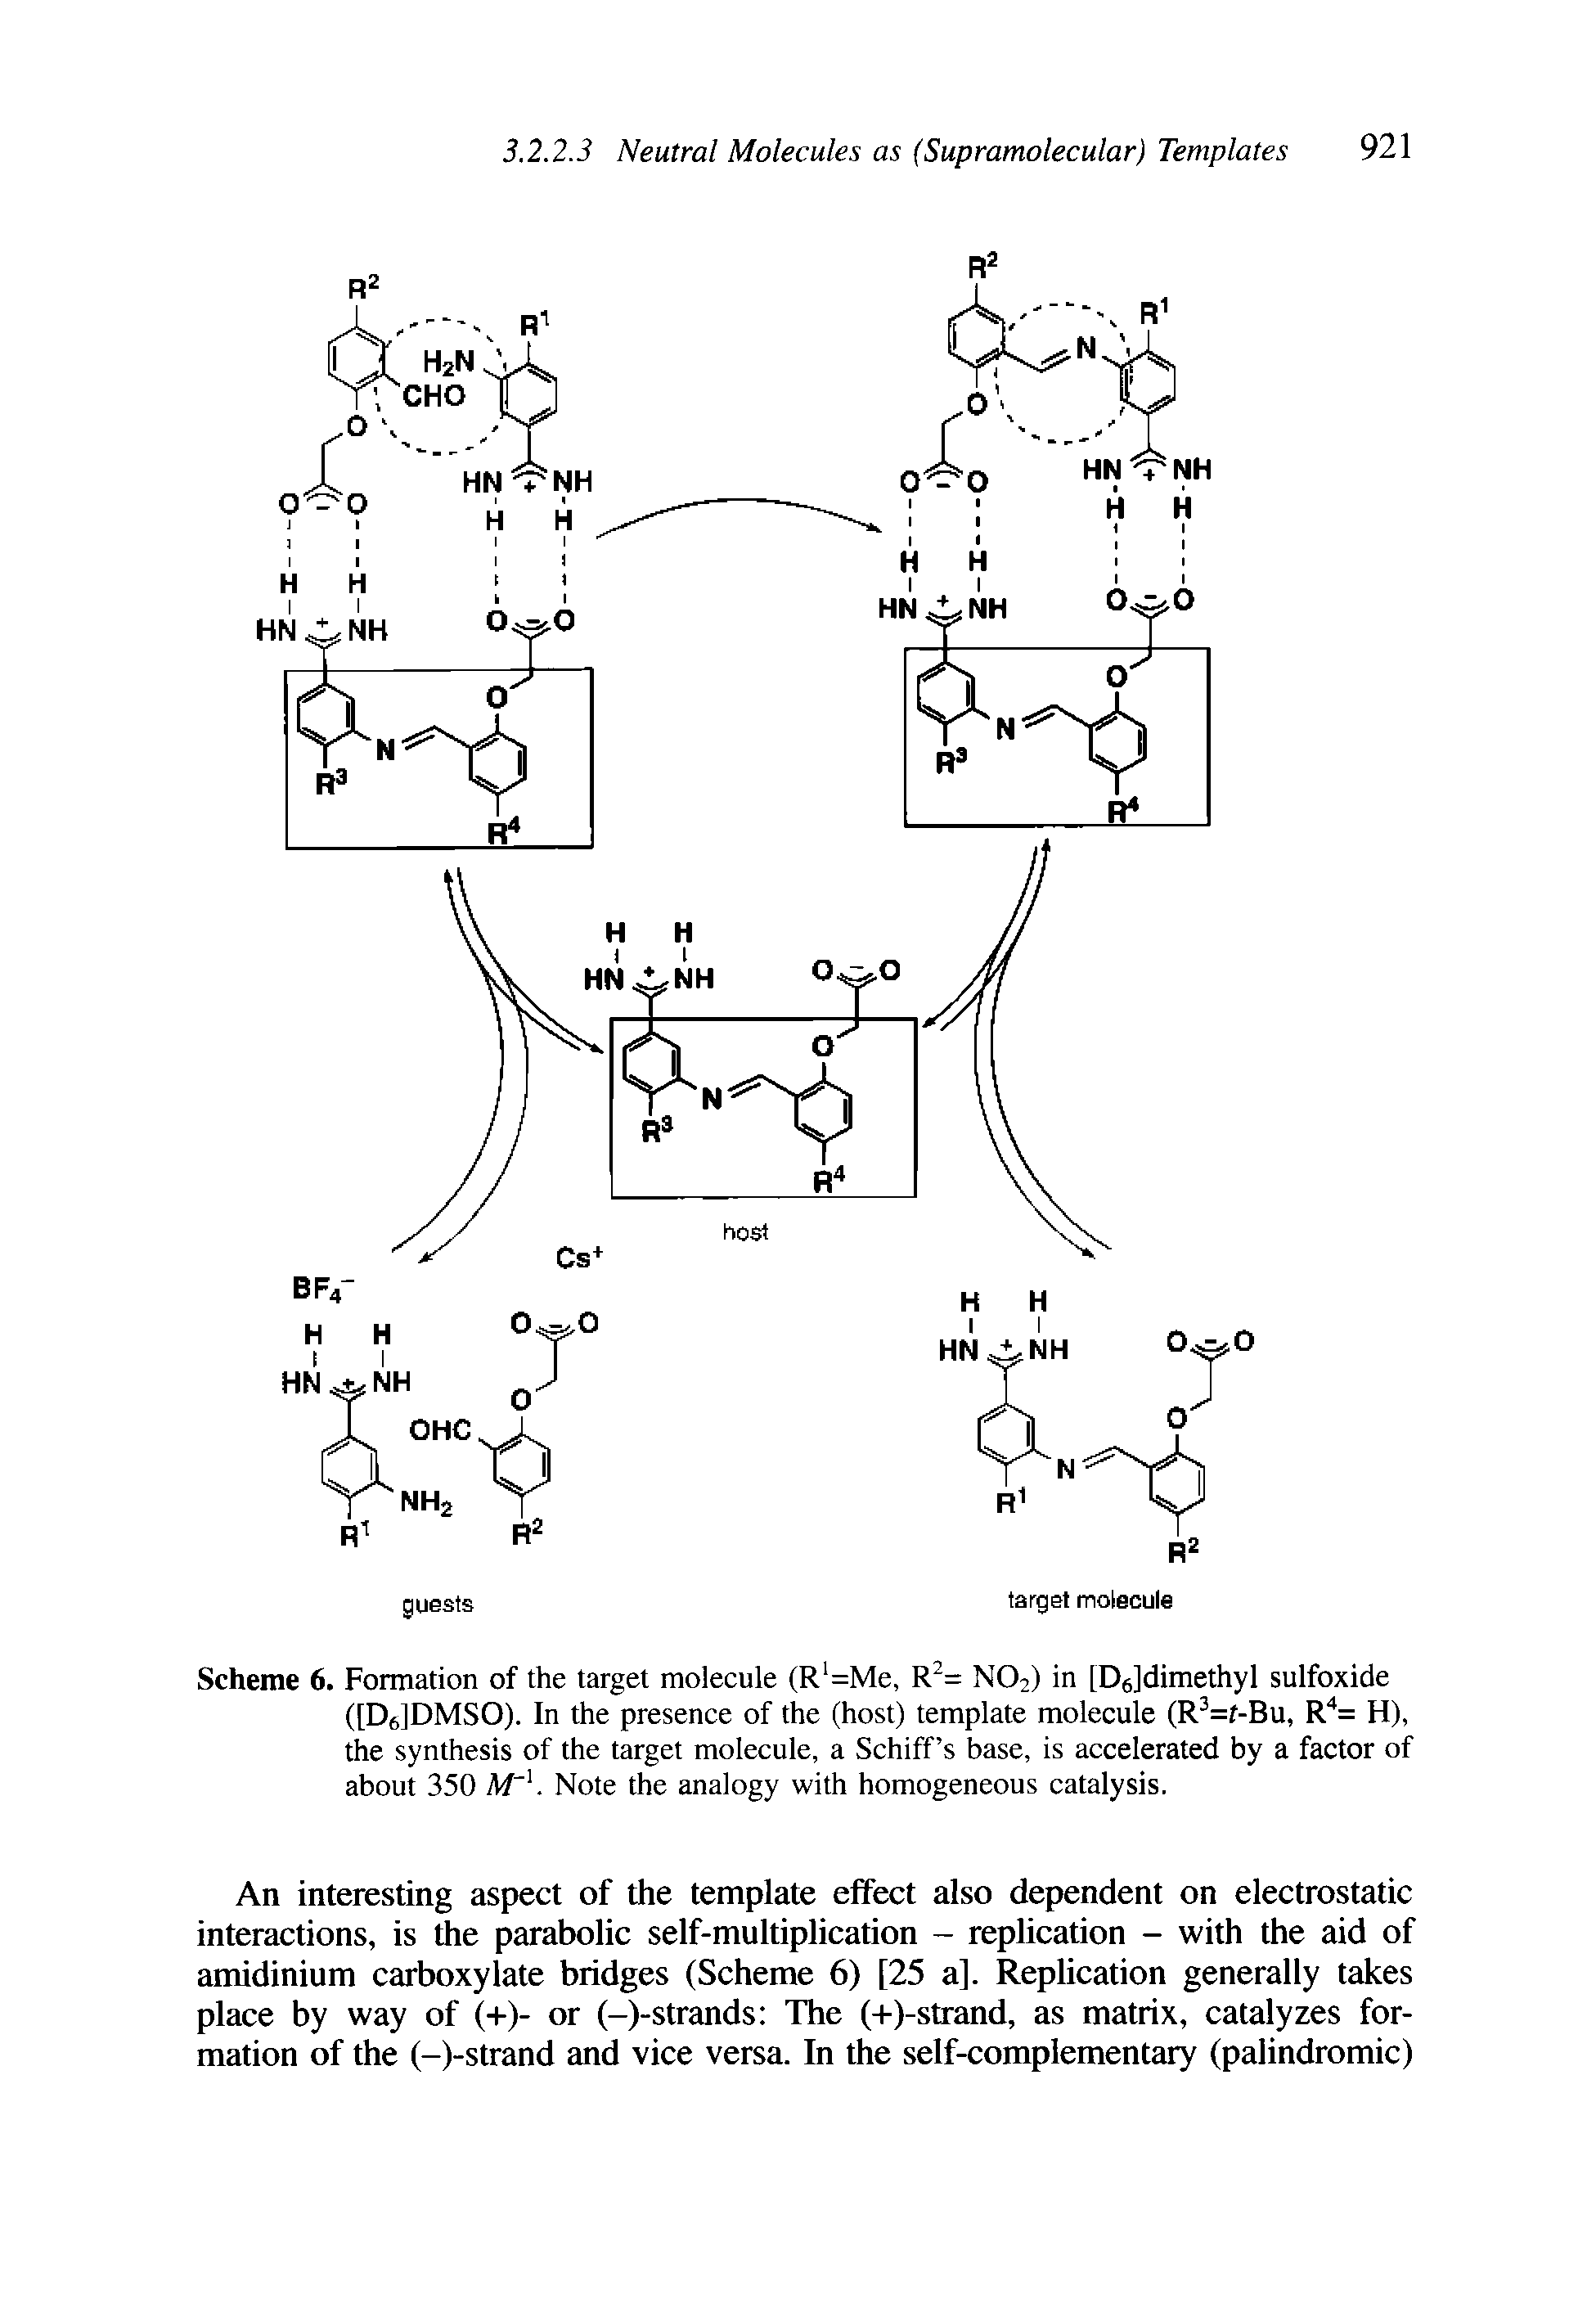 Scheme 6. Formation of the target molecule (R =Me, R = NO2) in [Deldimethyl sulfoxide ([DeJDMSO). In the presence of the (host) template molecule (R =f-Bu, R = H), the synthesis of the target molecule, a Schiff s base, is accelerated by a factor of about 350 Note the analogy with homogeneous catalysis.